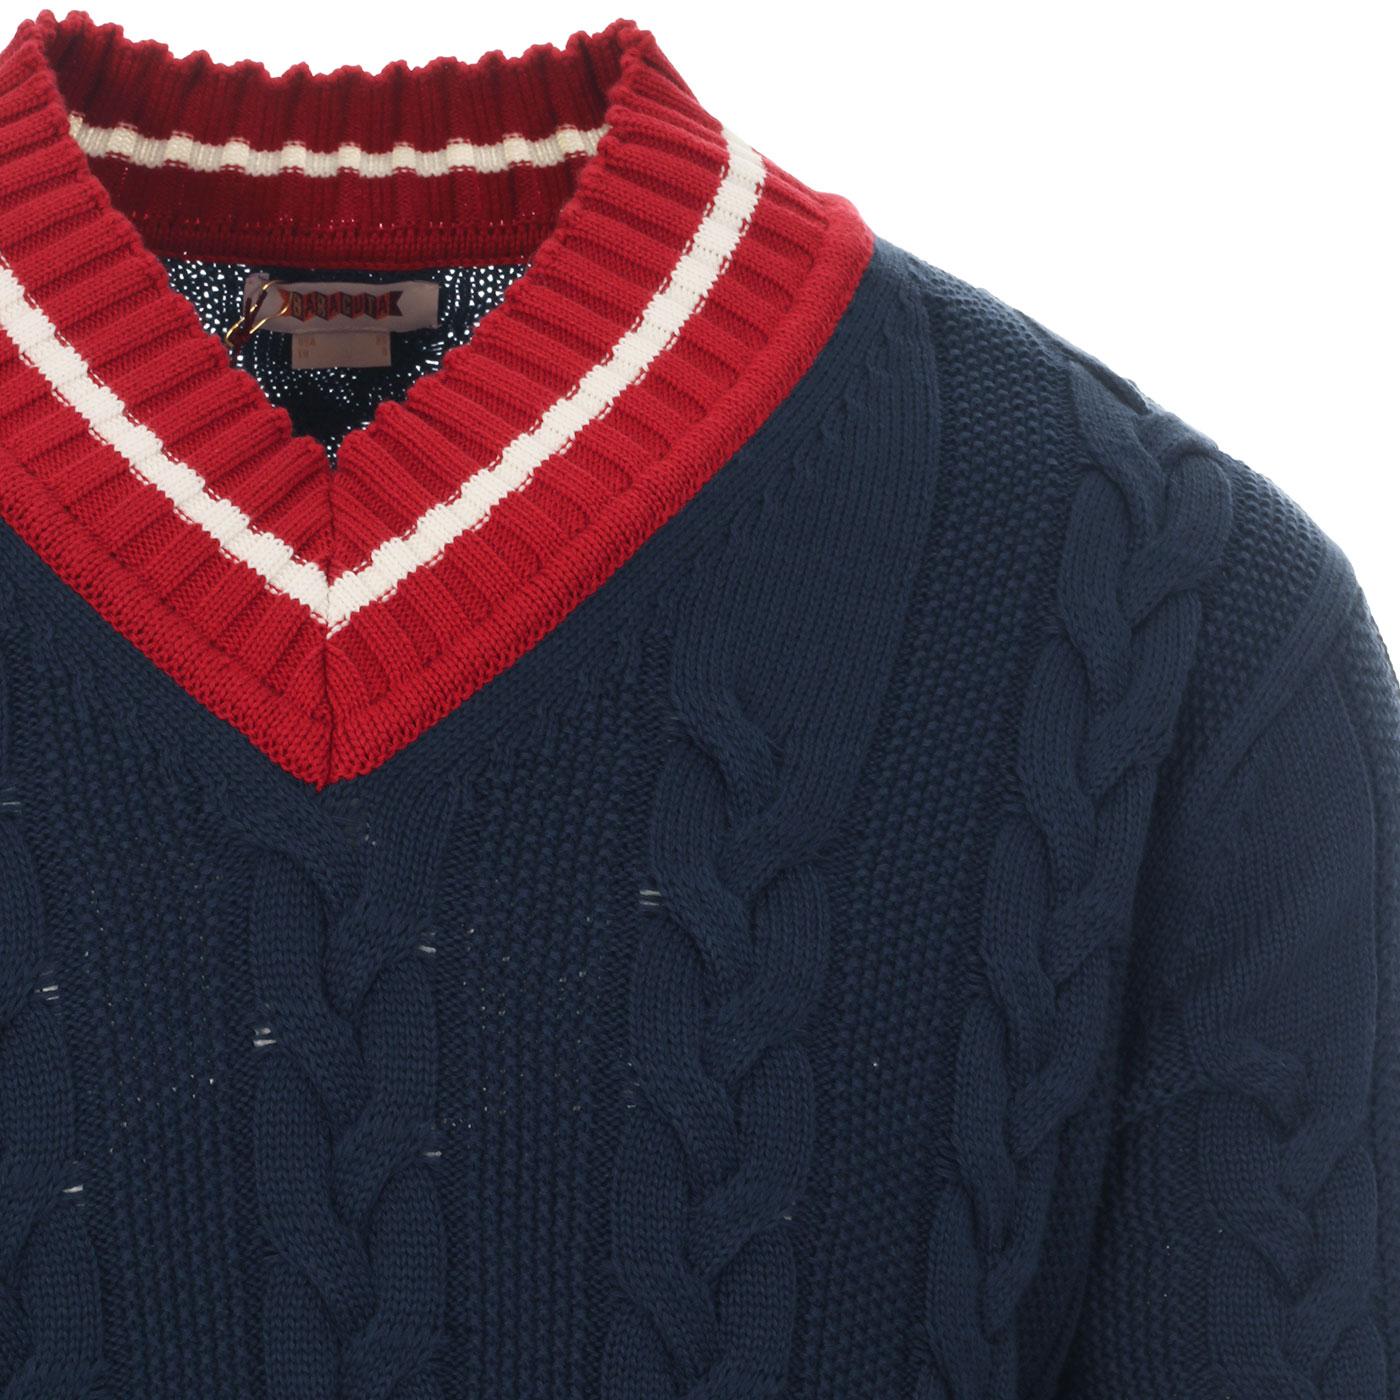 BARACUTA Ivy League Cable Knit Cricket Jumper in Navy